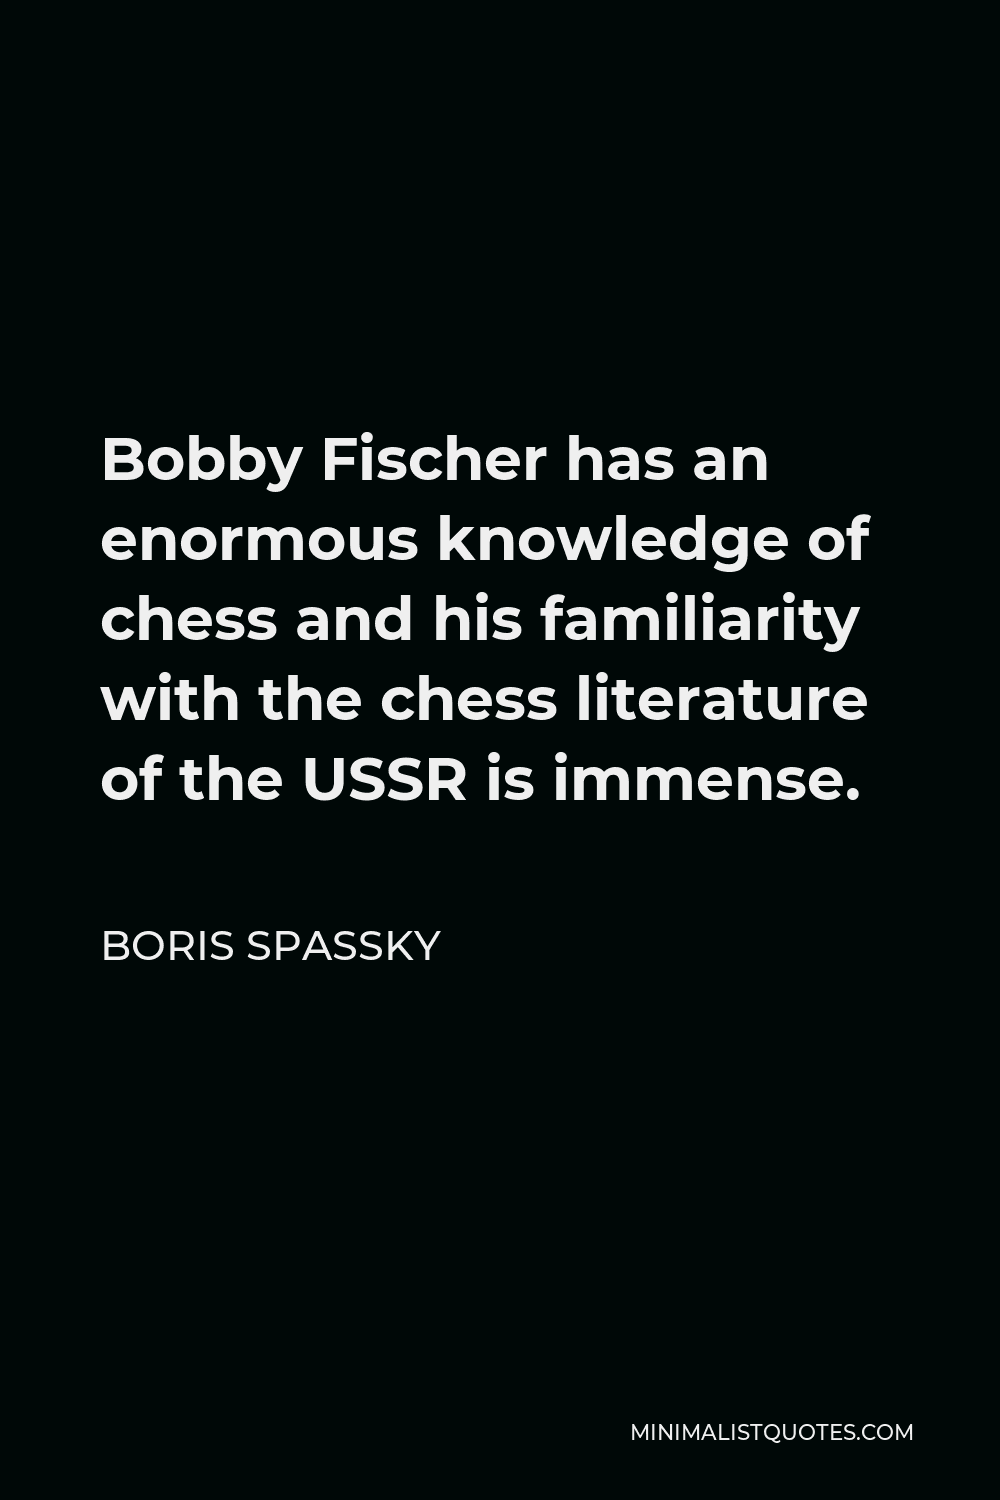 Boris Spassky Quote - Bobby Fischer has an enormous knowledge of chess and his familiarity with the chess literature of the USSR is immense.